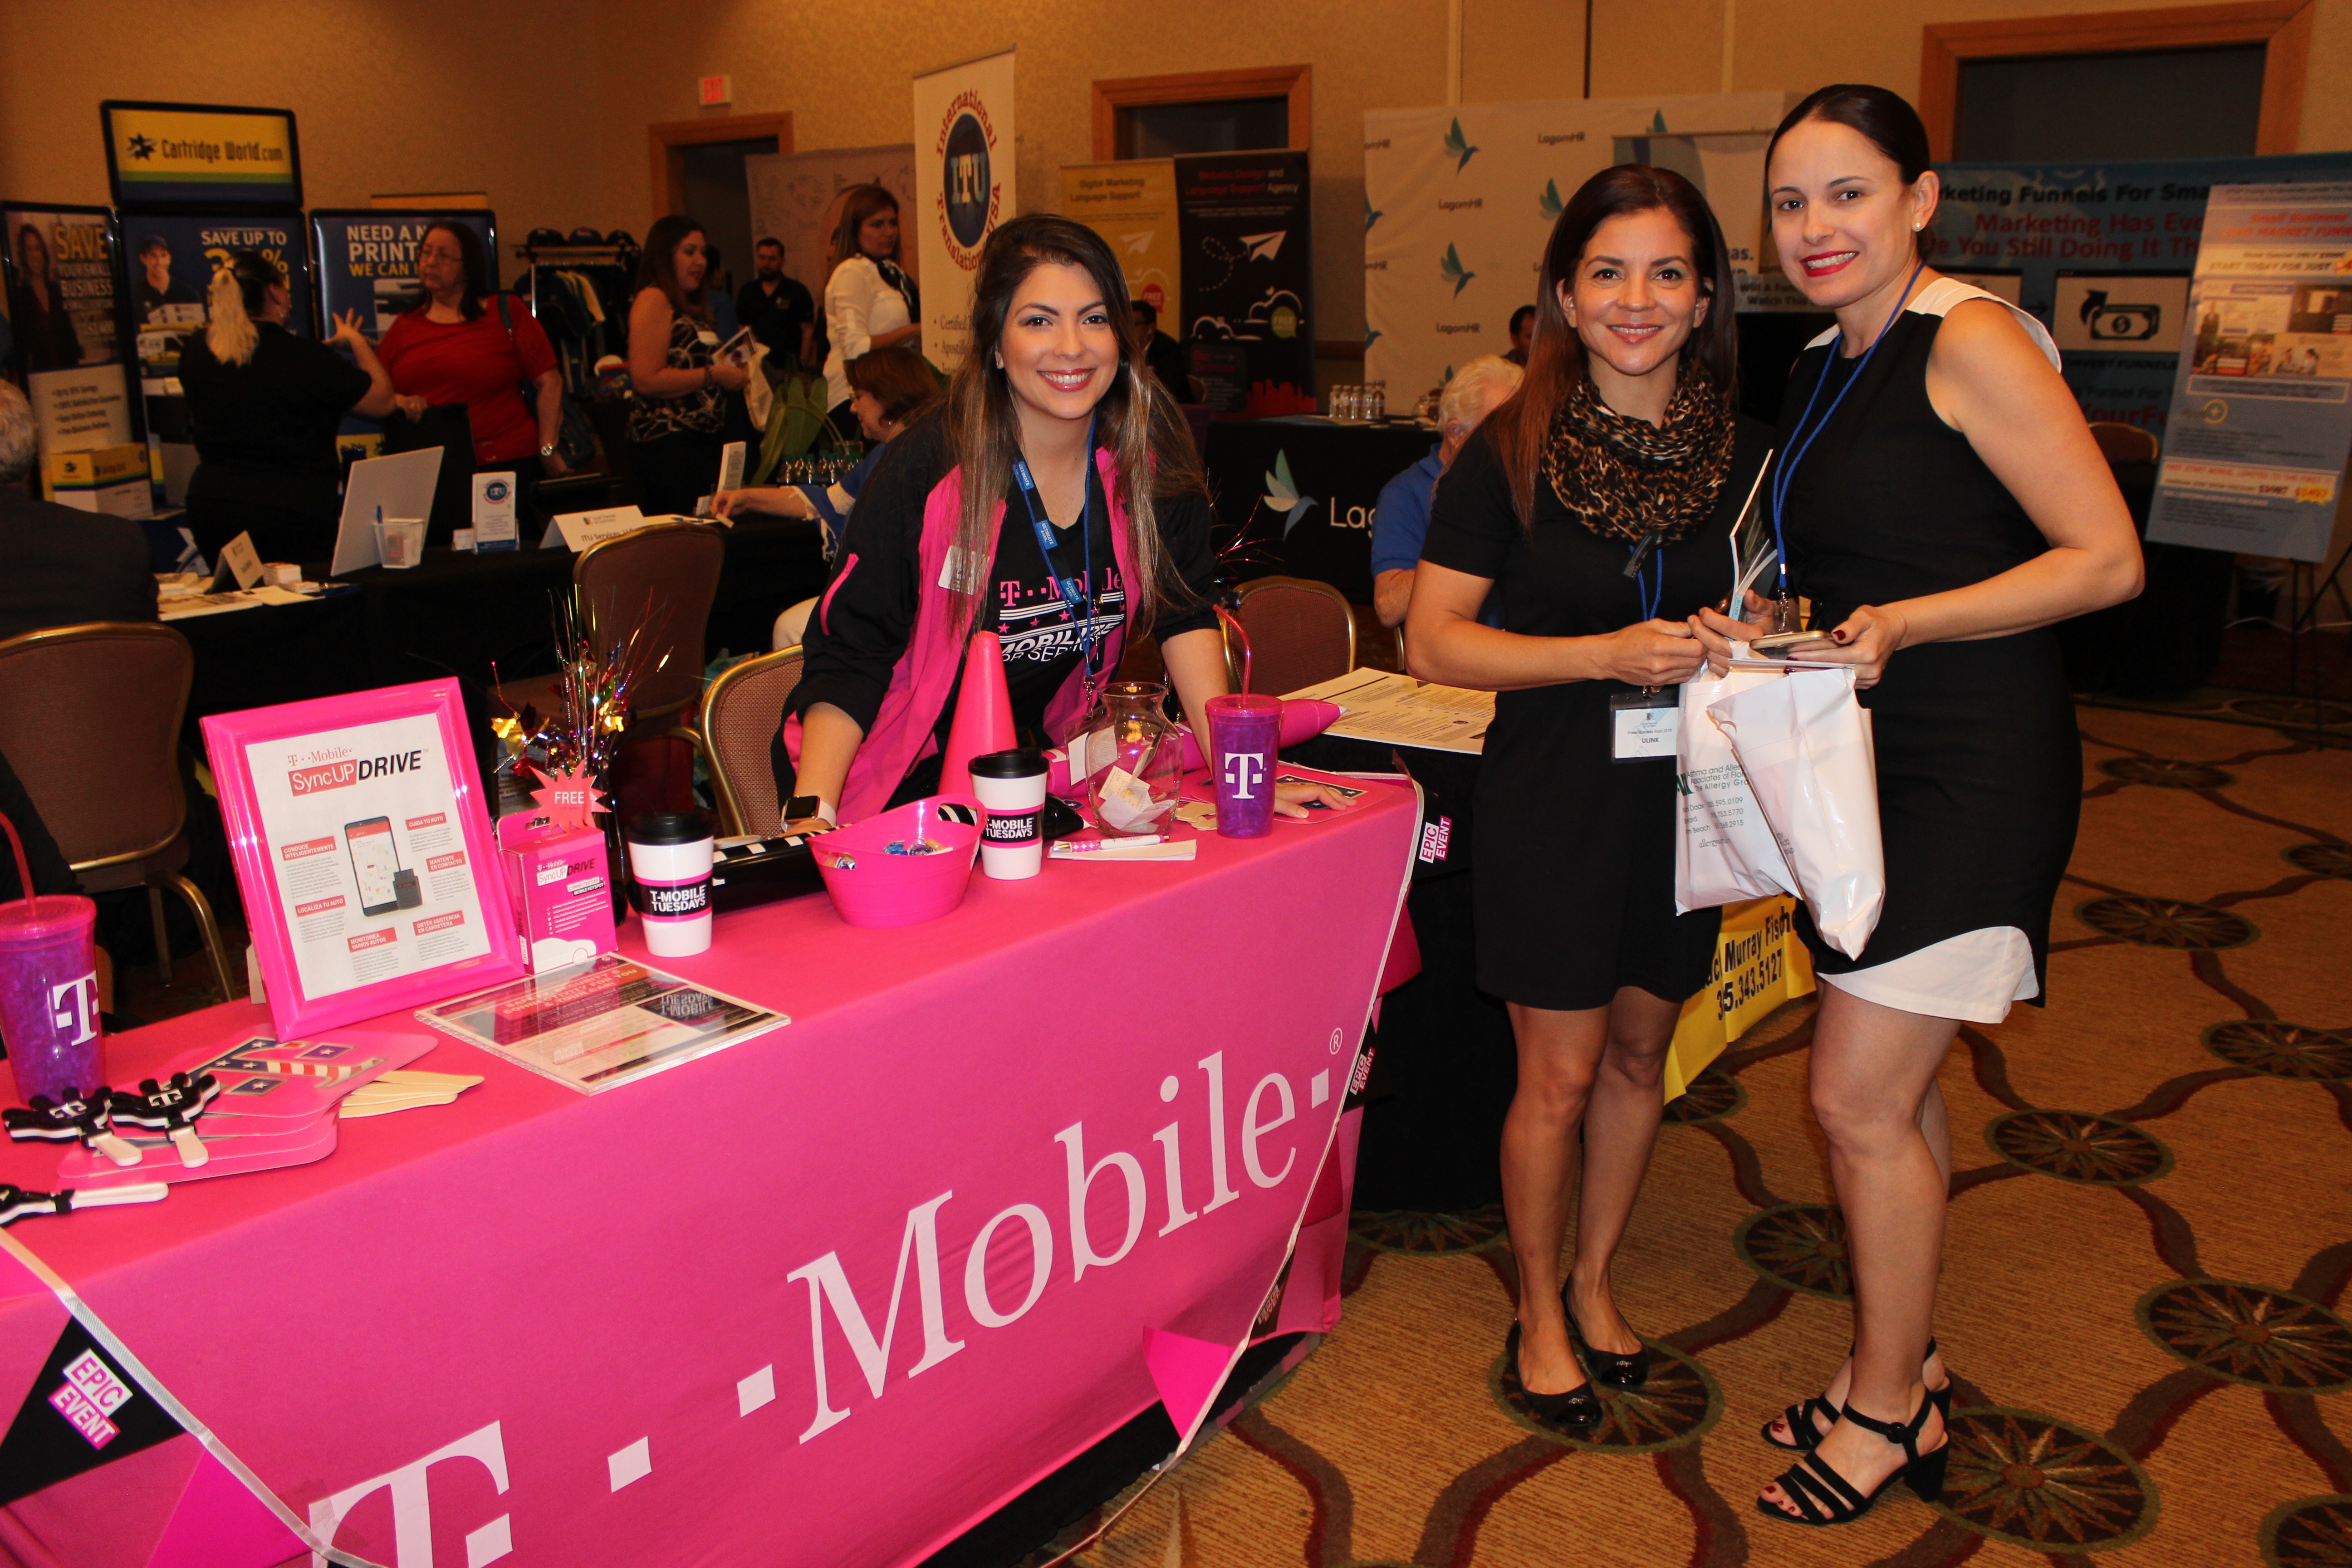 T-Mobile representing business in ExpoMiami 2018 hosted by the Doral Chamber of Commerce.